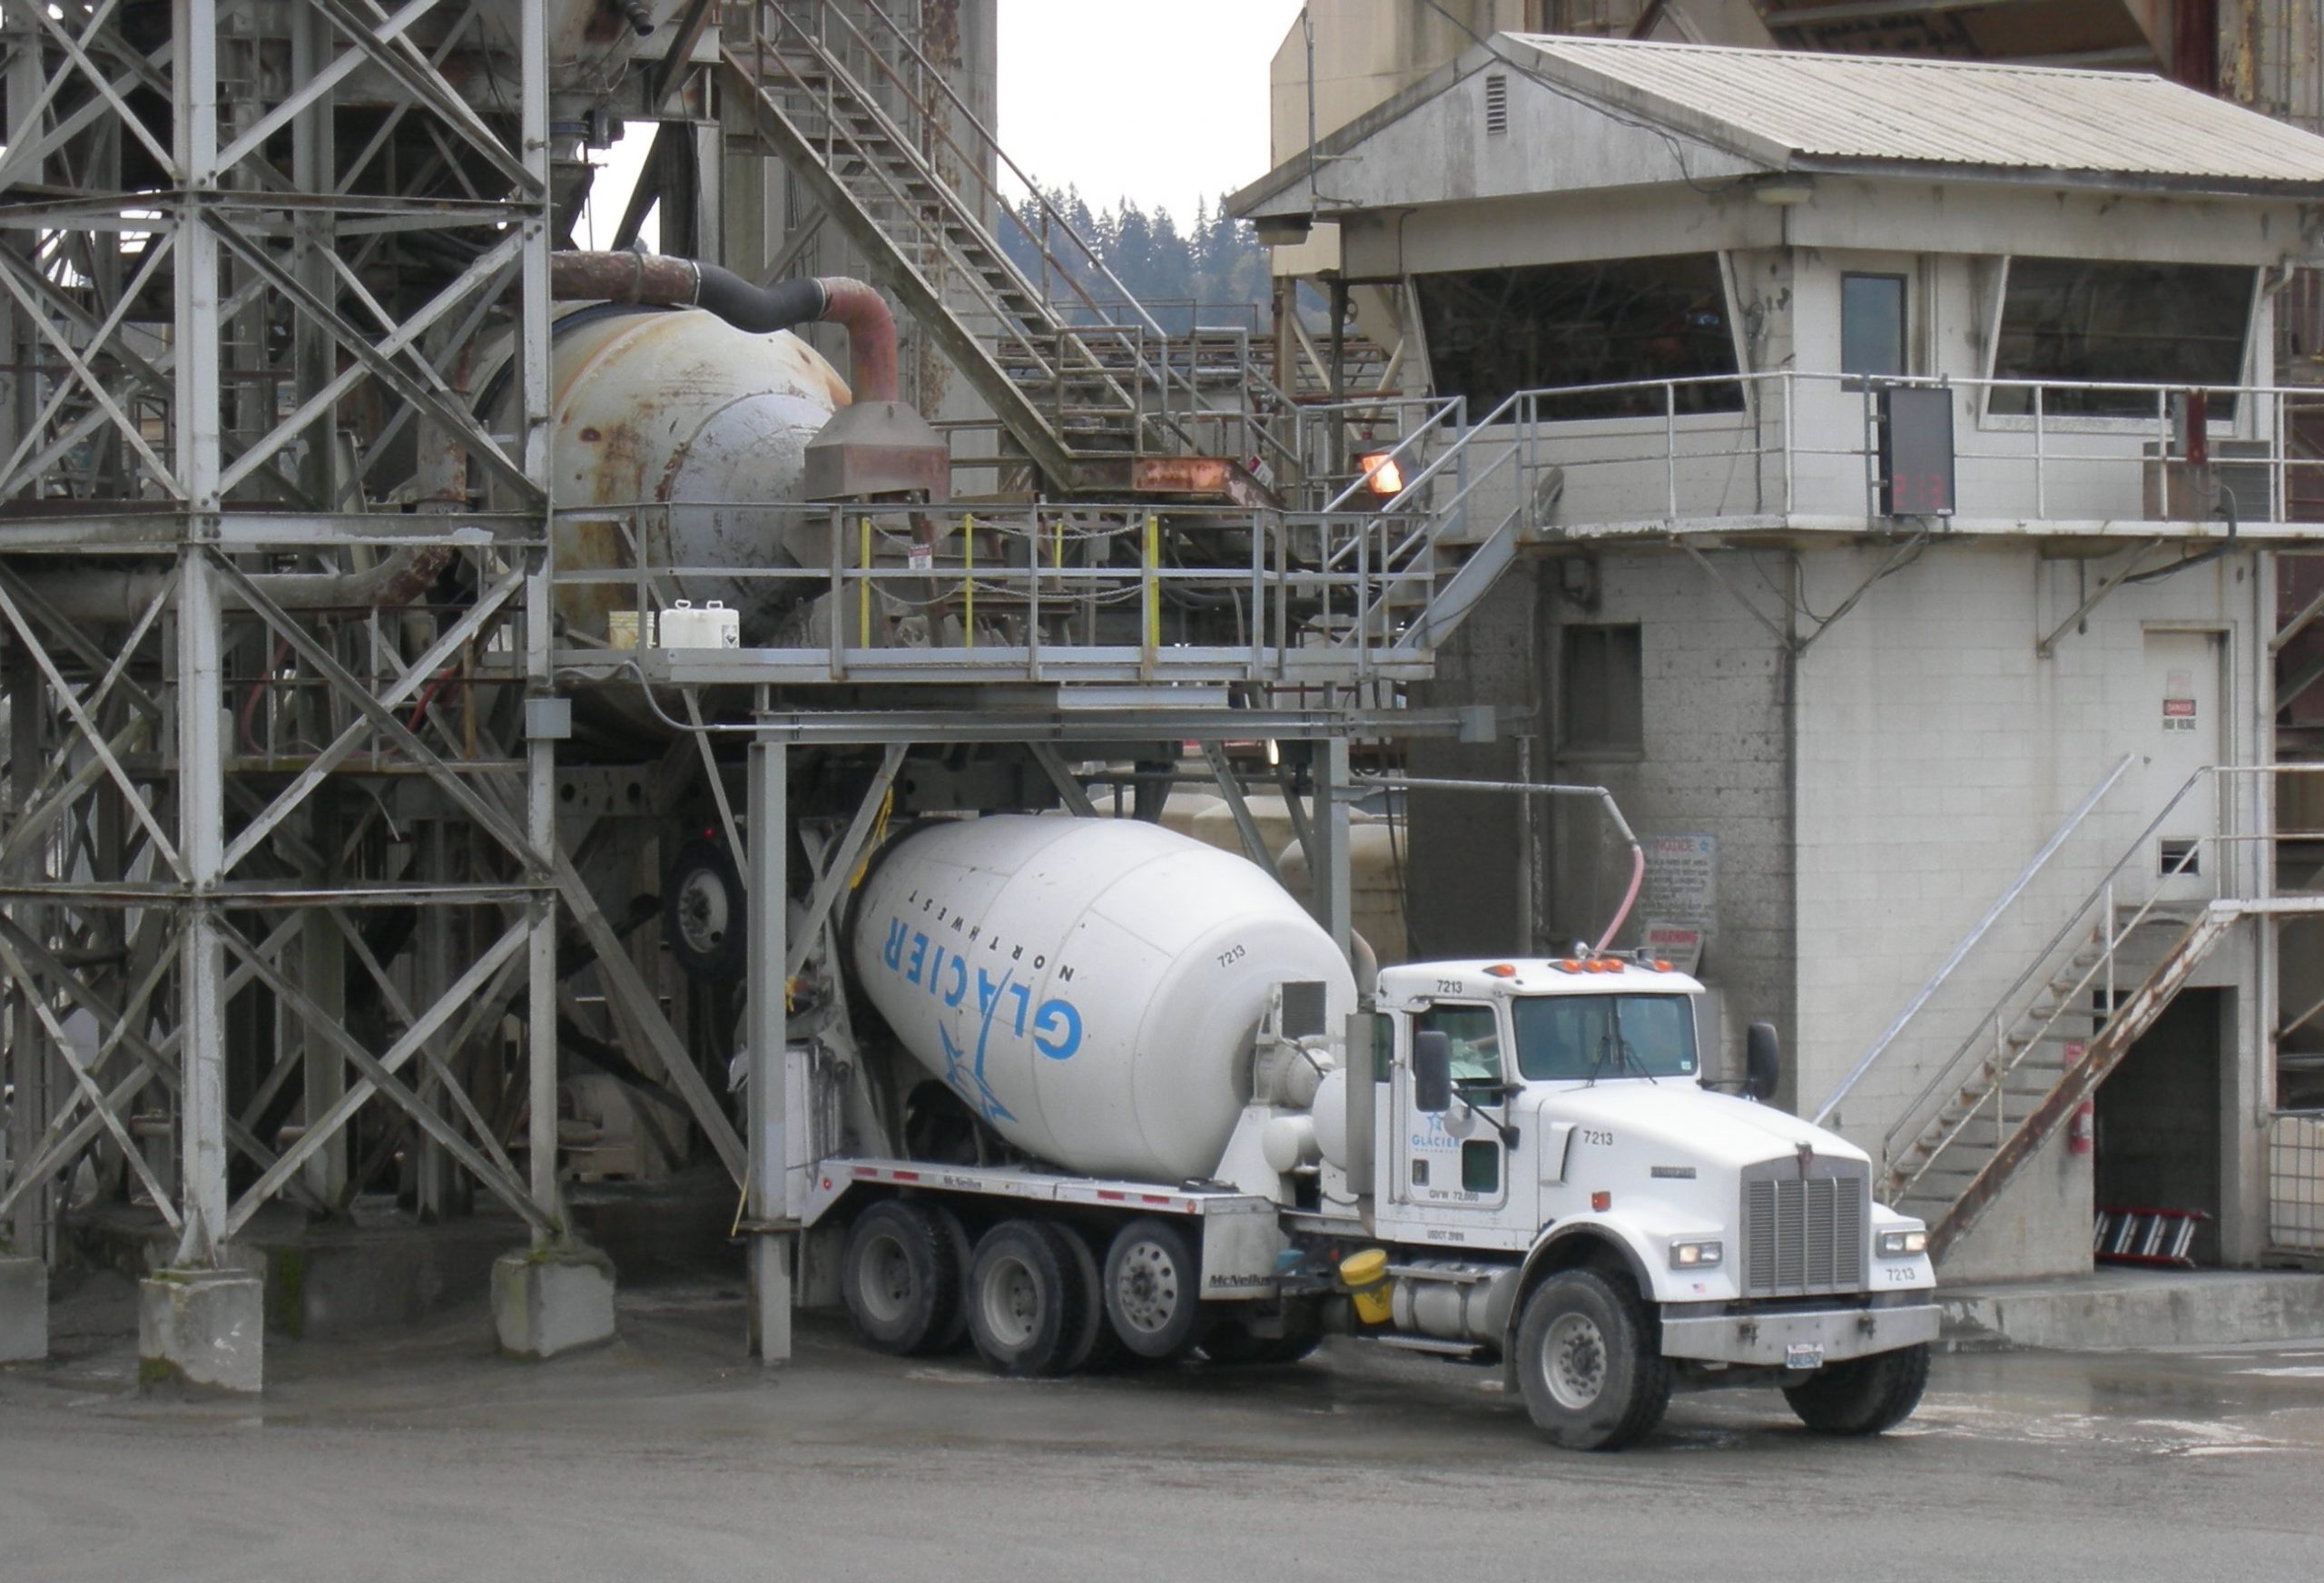 A cement mixer being filed at a cement plant.